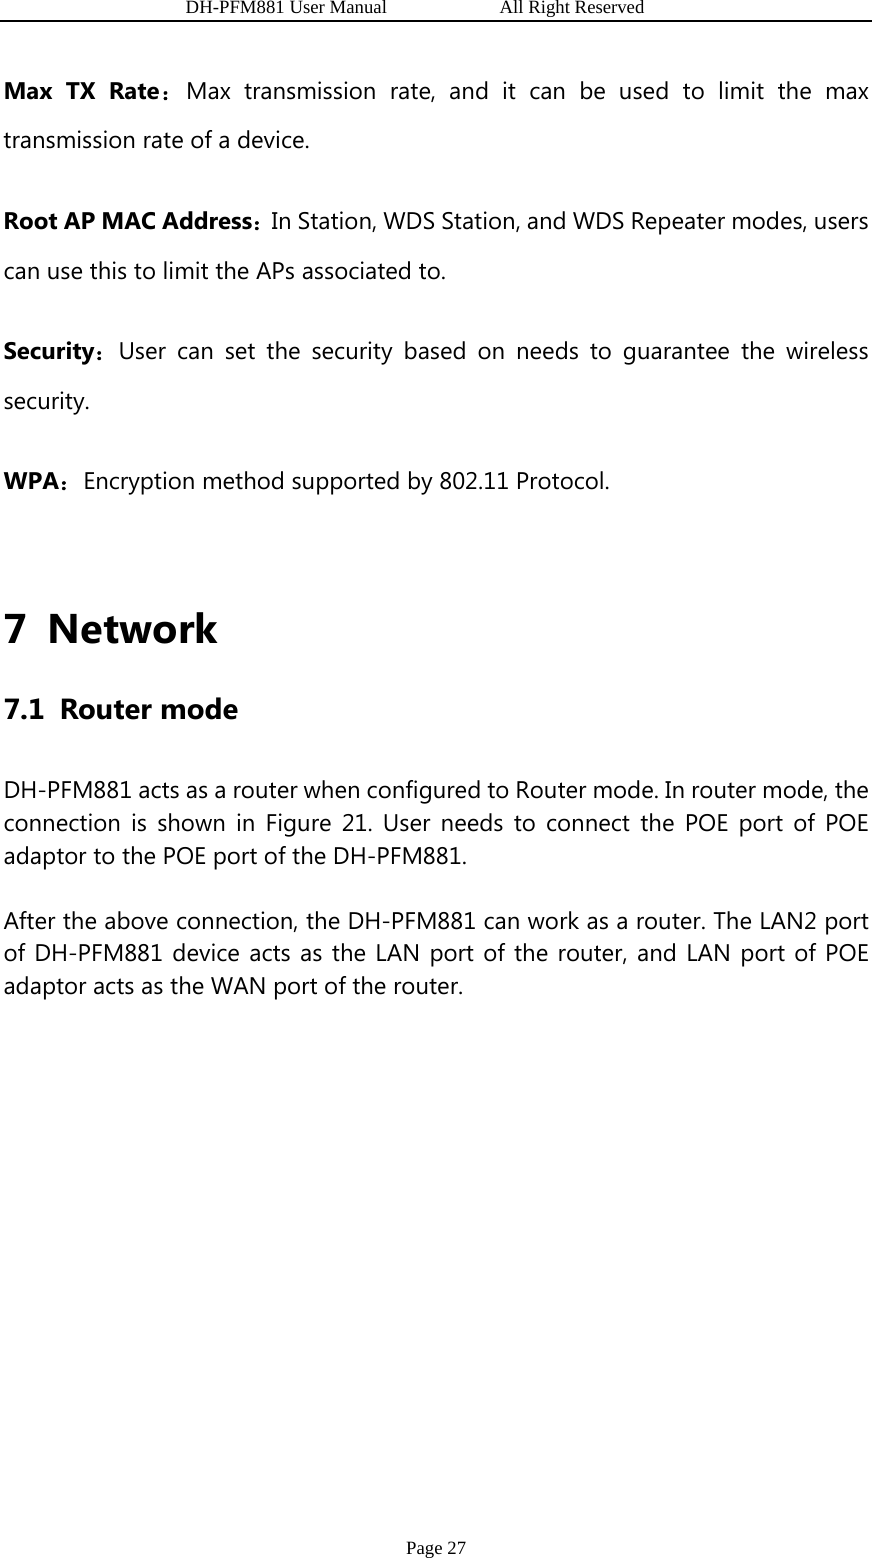                   DH-PFM881 User Manual            All Right Reserved Page 27 Max TX Rate：Max transmission rate, and it can be used to limit the max transmission rate of a device. Root AP MAC Address：In Station, WDS Station, and WDS Repeater modes, users can use this to limit the APs associated to. Security：User can set the security based on needs to guarantee the wireless security. WPA：Encryption method supported by 802.11 Protocol.  7 Network 7.1 Router mode DH-PFM881 acts as a router when configured to Router mode. In router mode, the connection is shown in Figure 21. User needs to connect the POE port of POE adaptor to the POE port of the DH-PFM881.   After the above connection, the DH-PFM881 can work as a router. The LAN2 port of DH-PFM881 device acts as the LAN port of the router, and LAN port of POE adaptor acts as the WAN port of the router. 